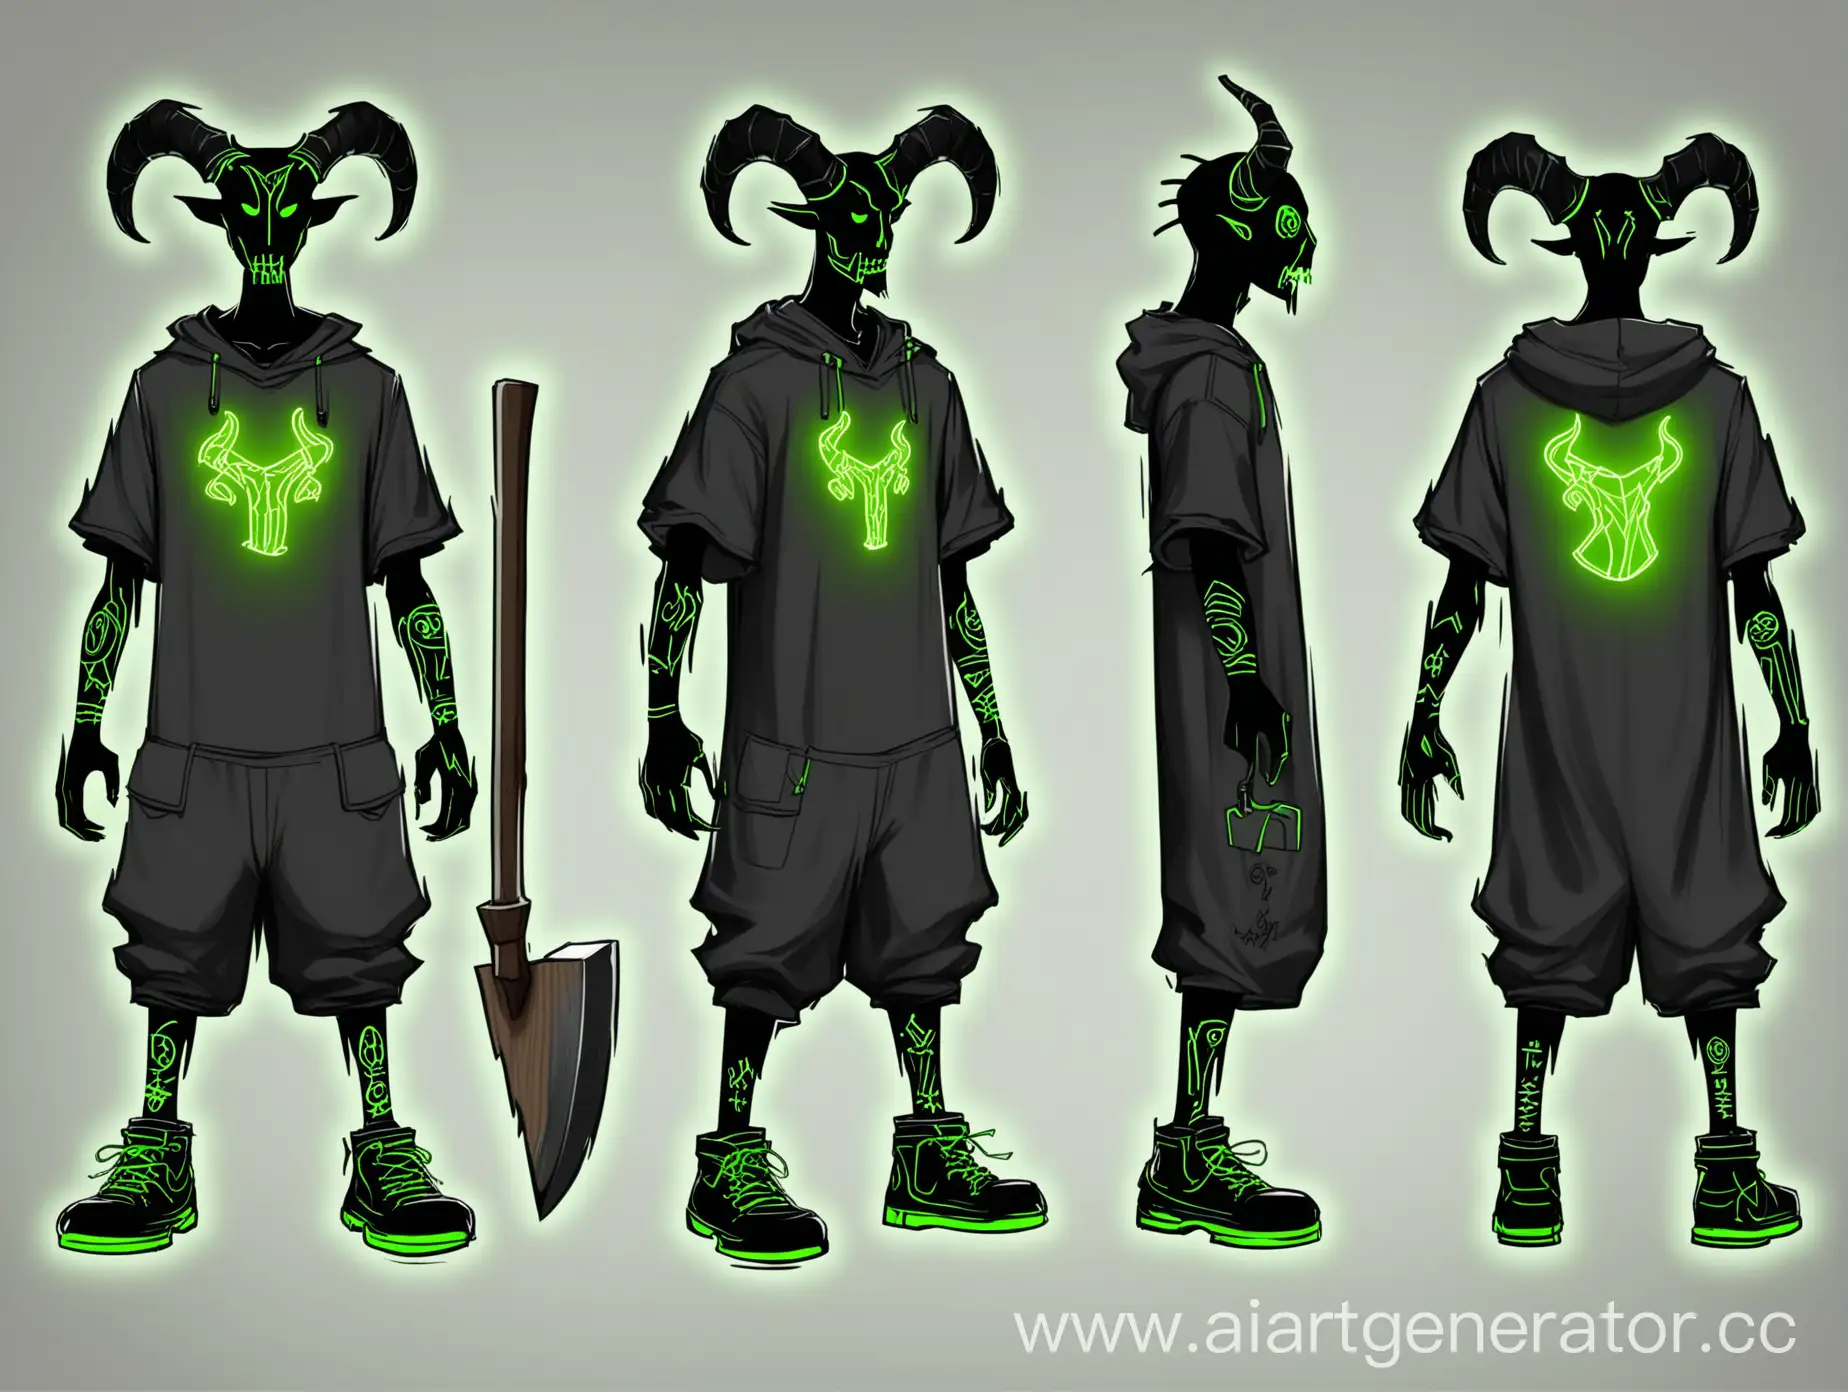 Stickman art reference sheet design with horns volumetric body neon tattoos in baggy clothes with an ax